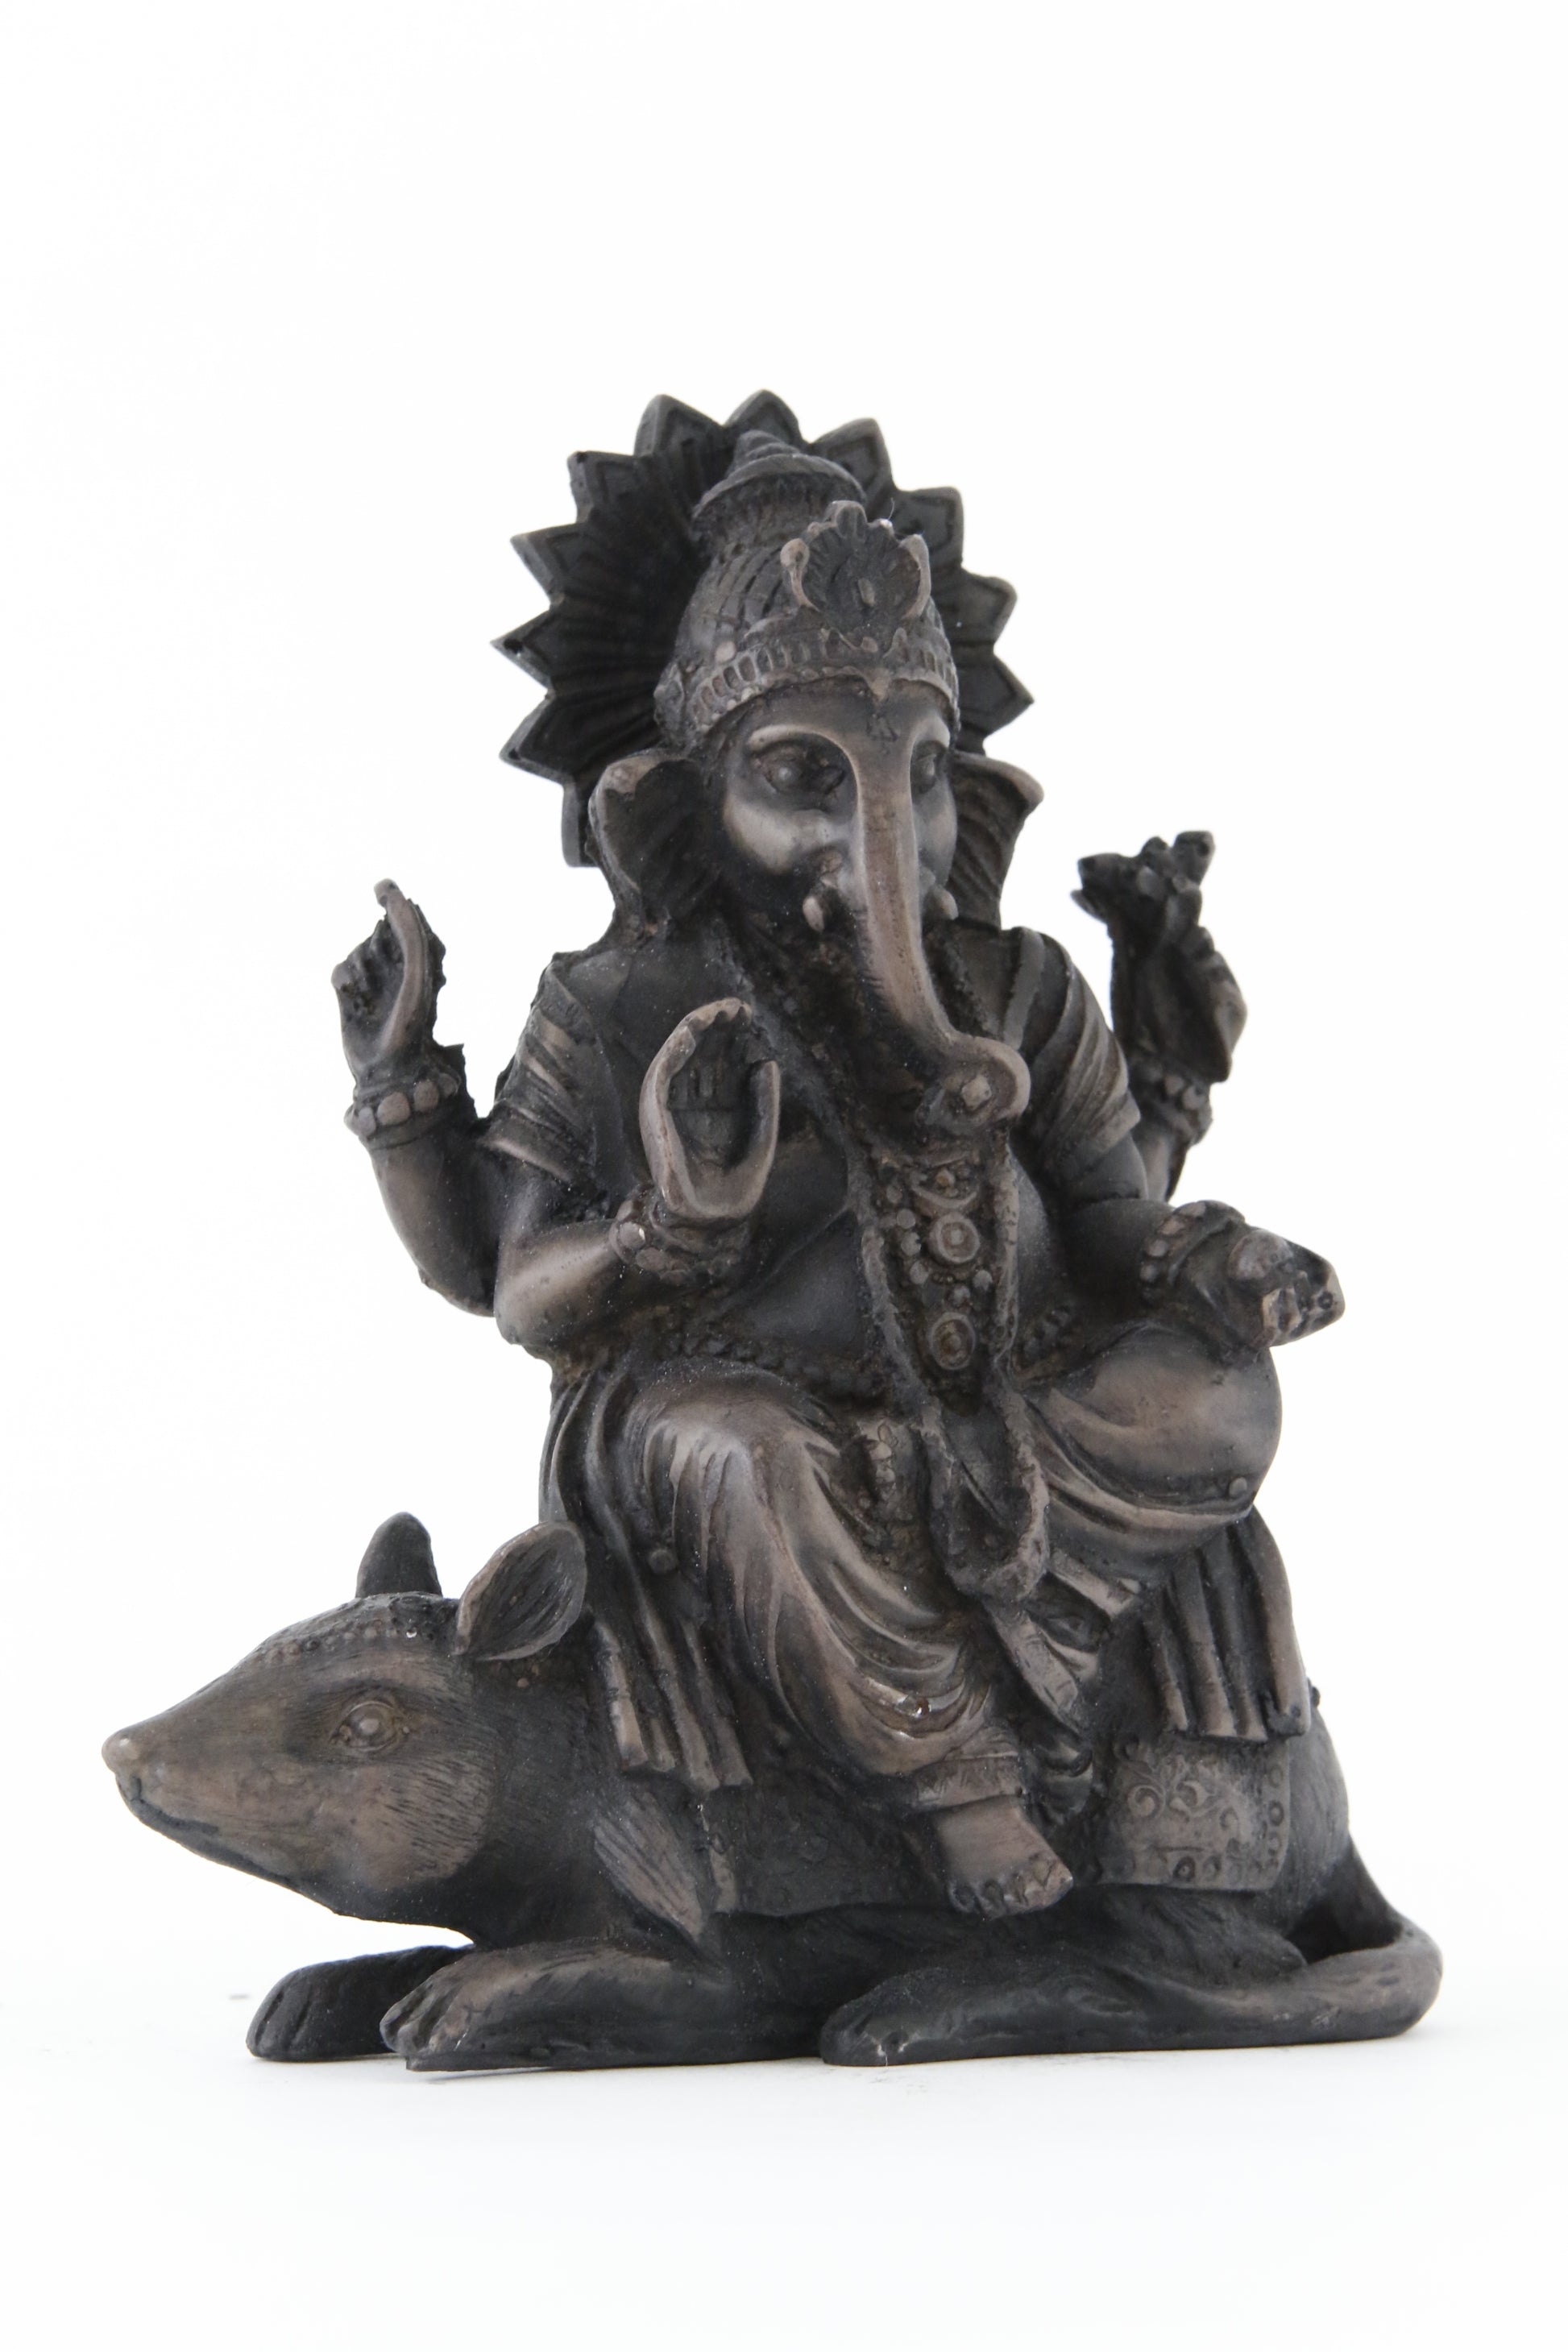 GANESHA ON MOUSE STATUE DARK SIDE VIEW